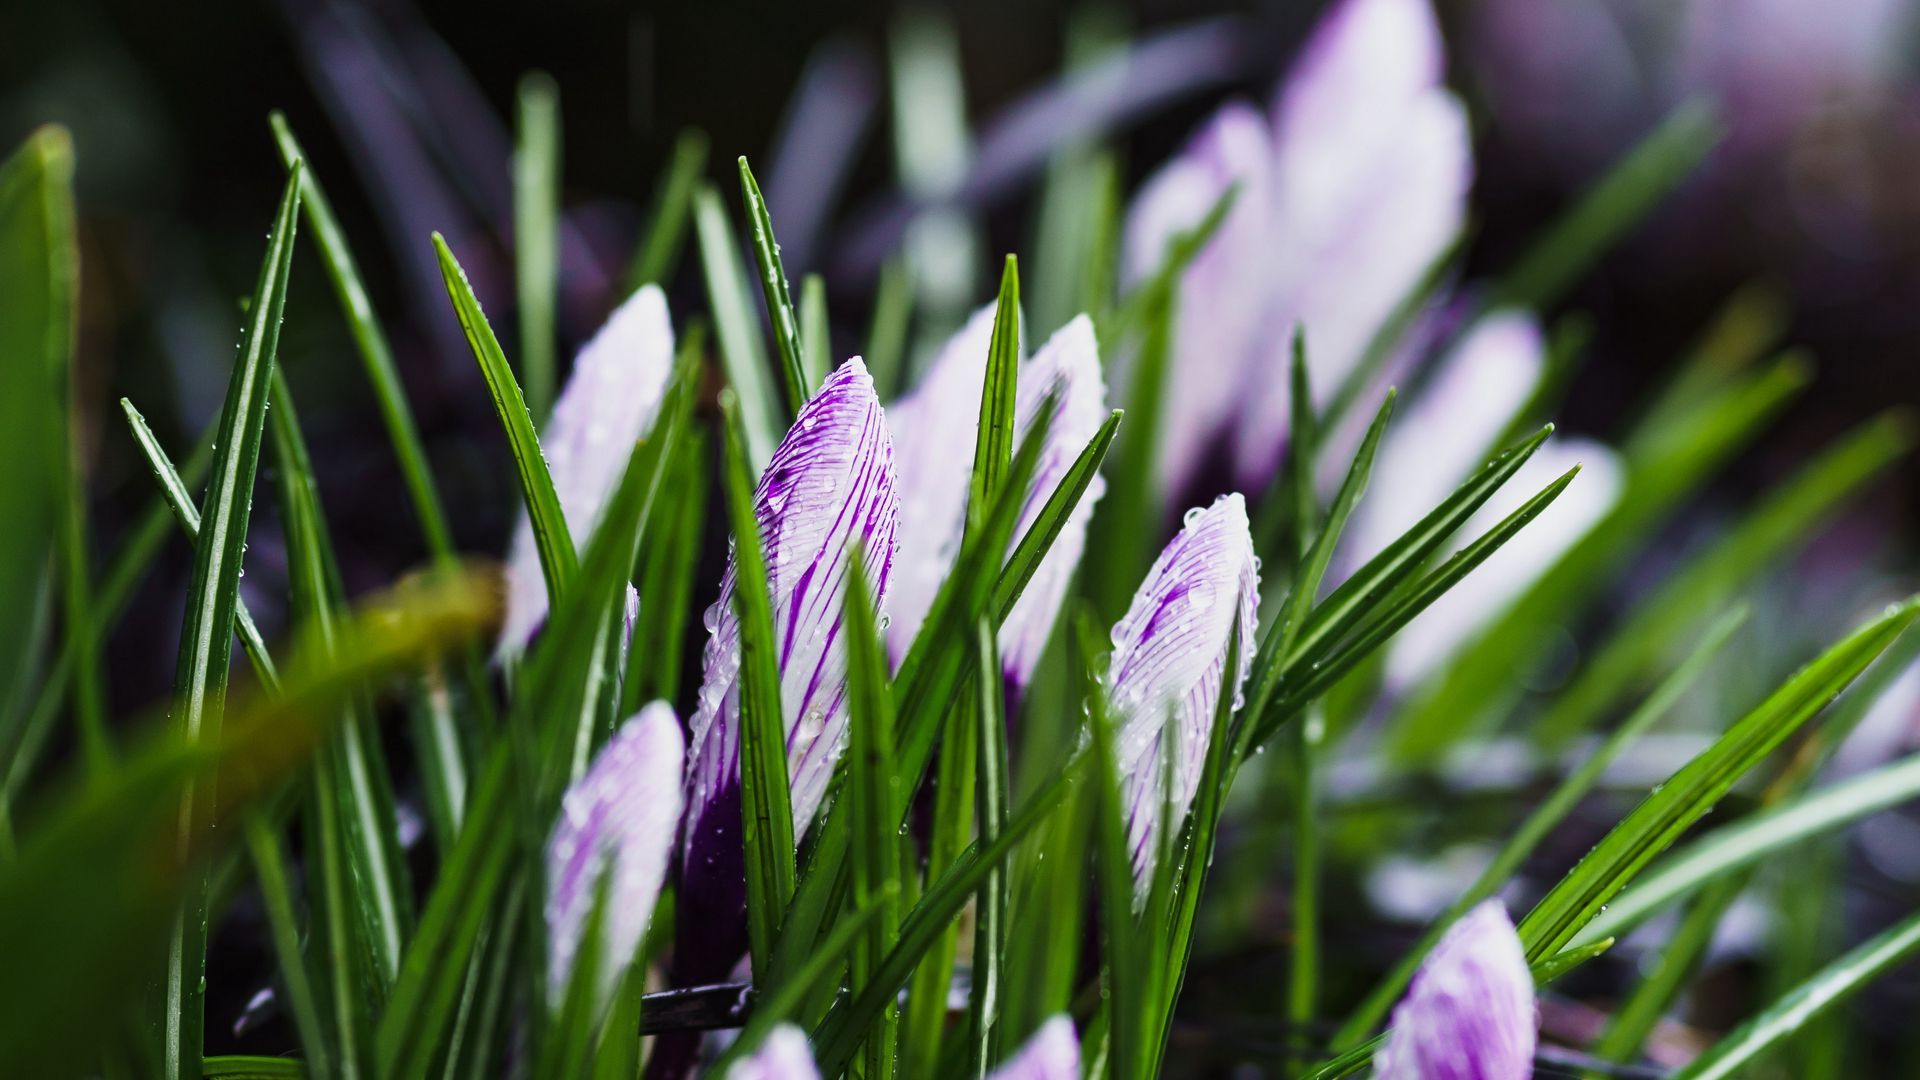 Download wallpaper 1920x1080 spring, flowers, grass, flowering full hd, hdtv, fhd, 1080p HD background